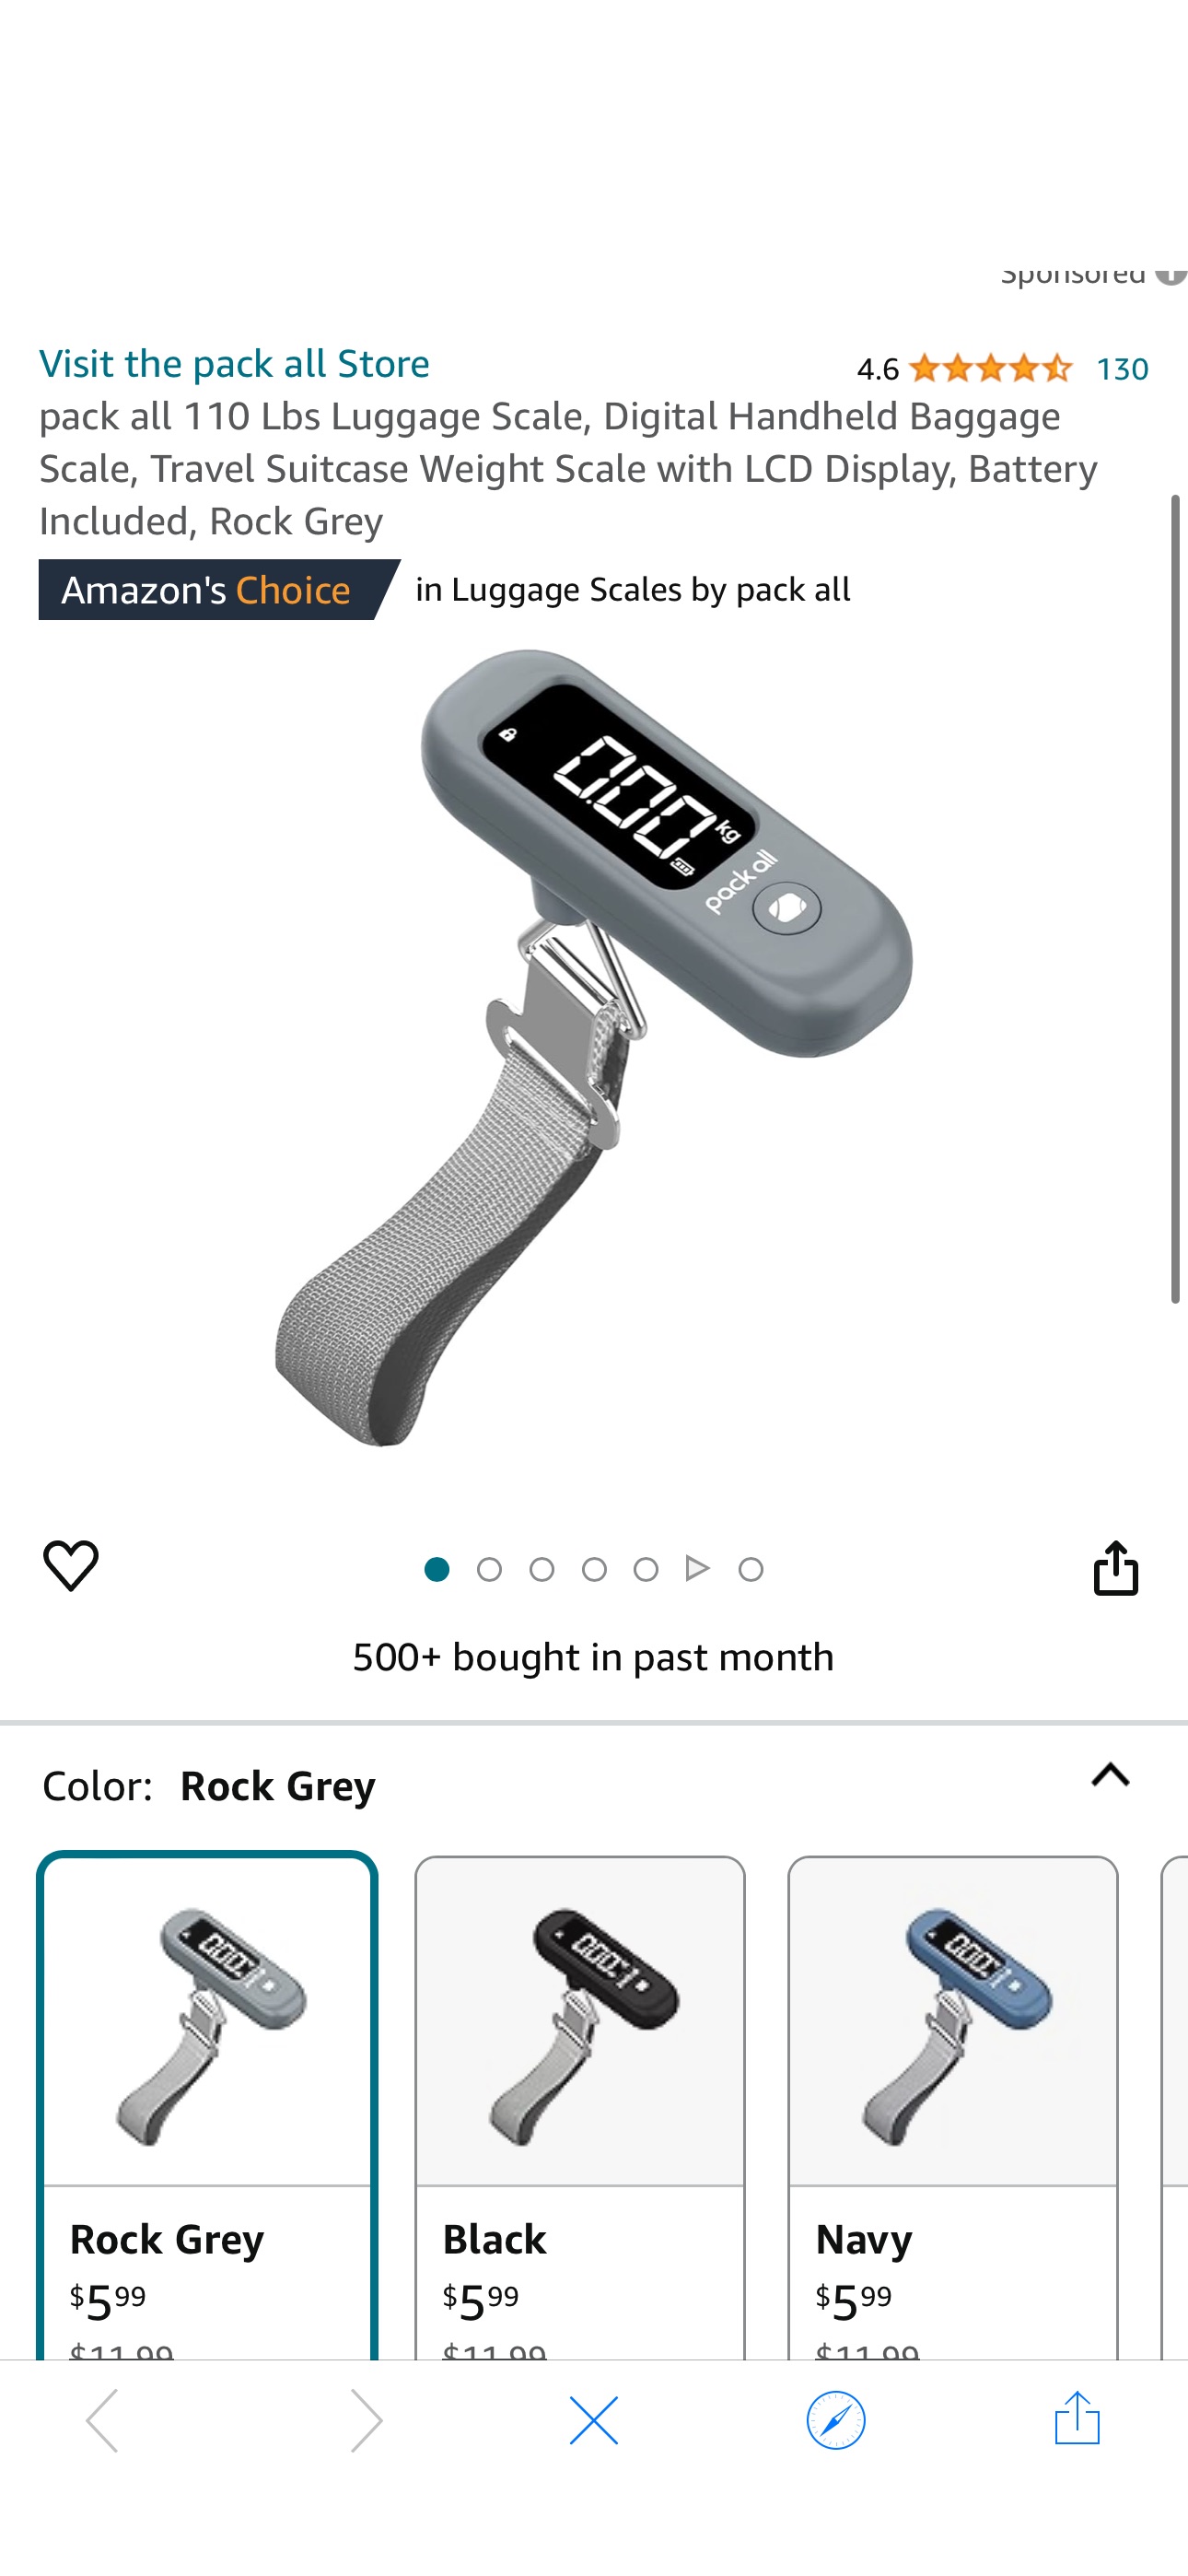 Amazon.com: pack all 110 Lbs Luggage Scale, Digital Handheld Baggage Scale, Travel Suitcase Weight Scale with LCD Display, Battery Included, Rock Grey : Clothing, Shoes & Jewelry